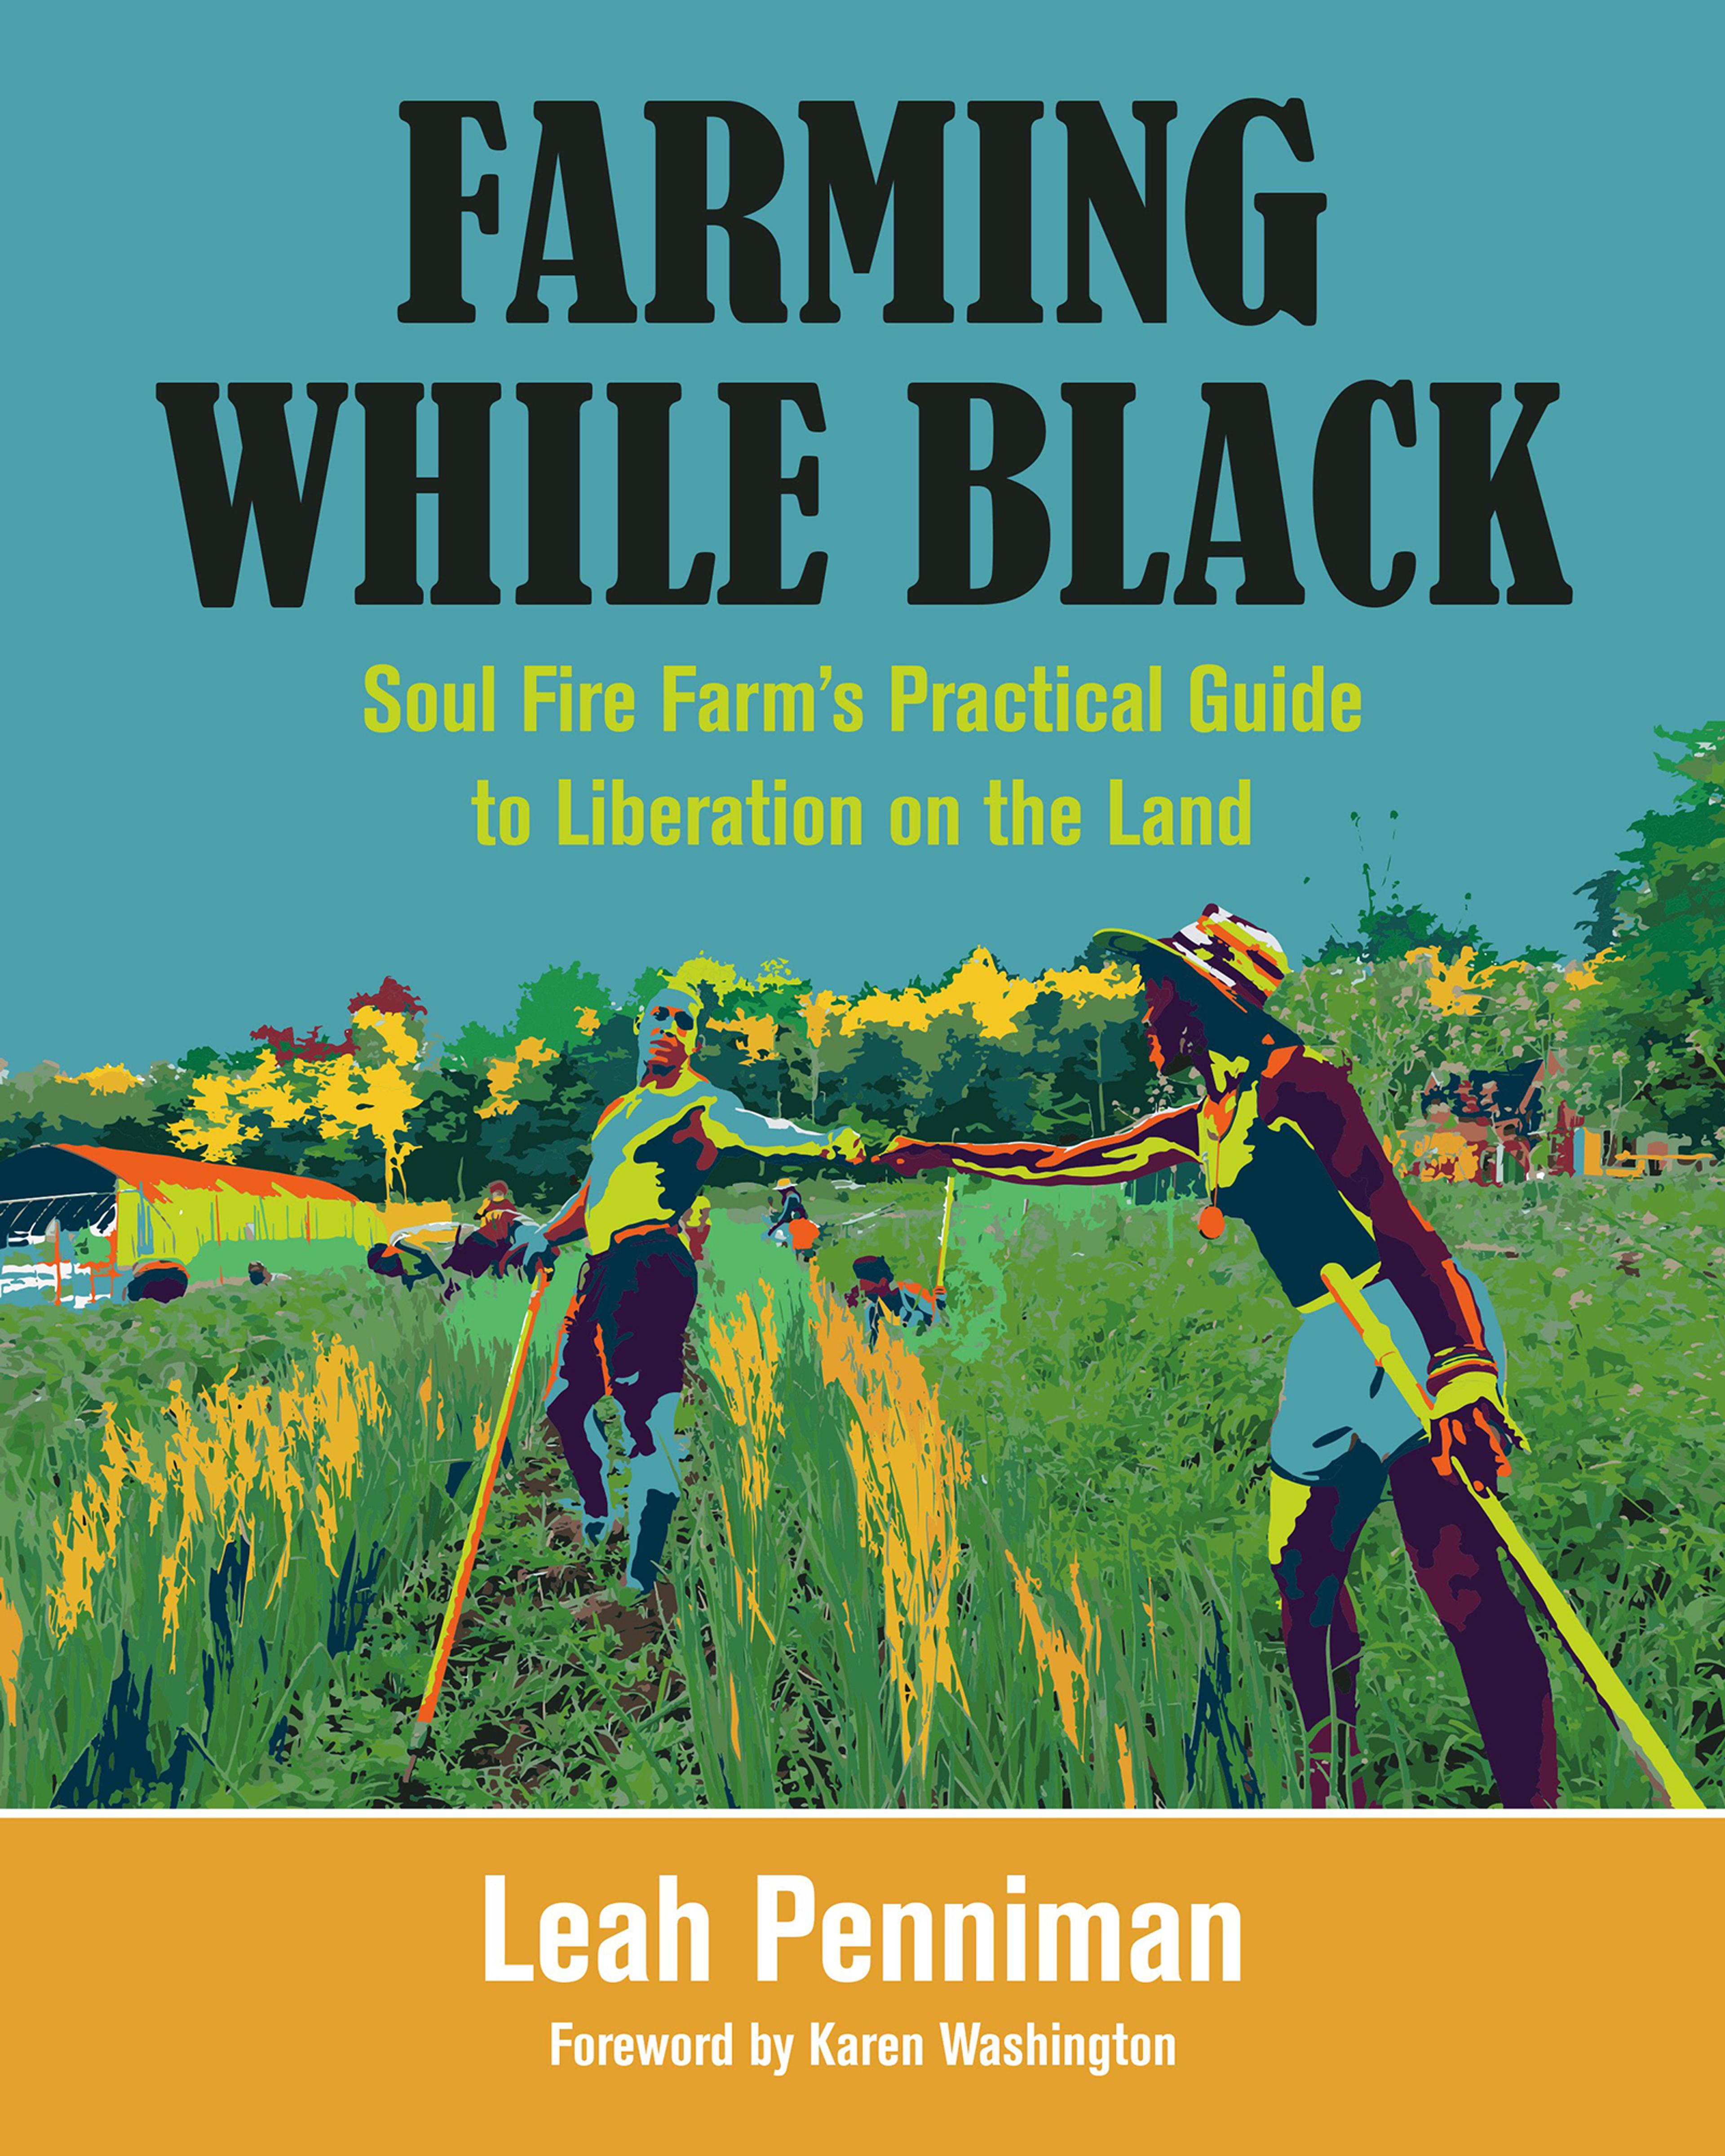 Book Cover of Farming While Black: Soul Fire Farm’s Practical Guide to Liberation on the Land.